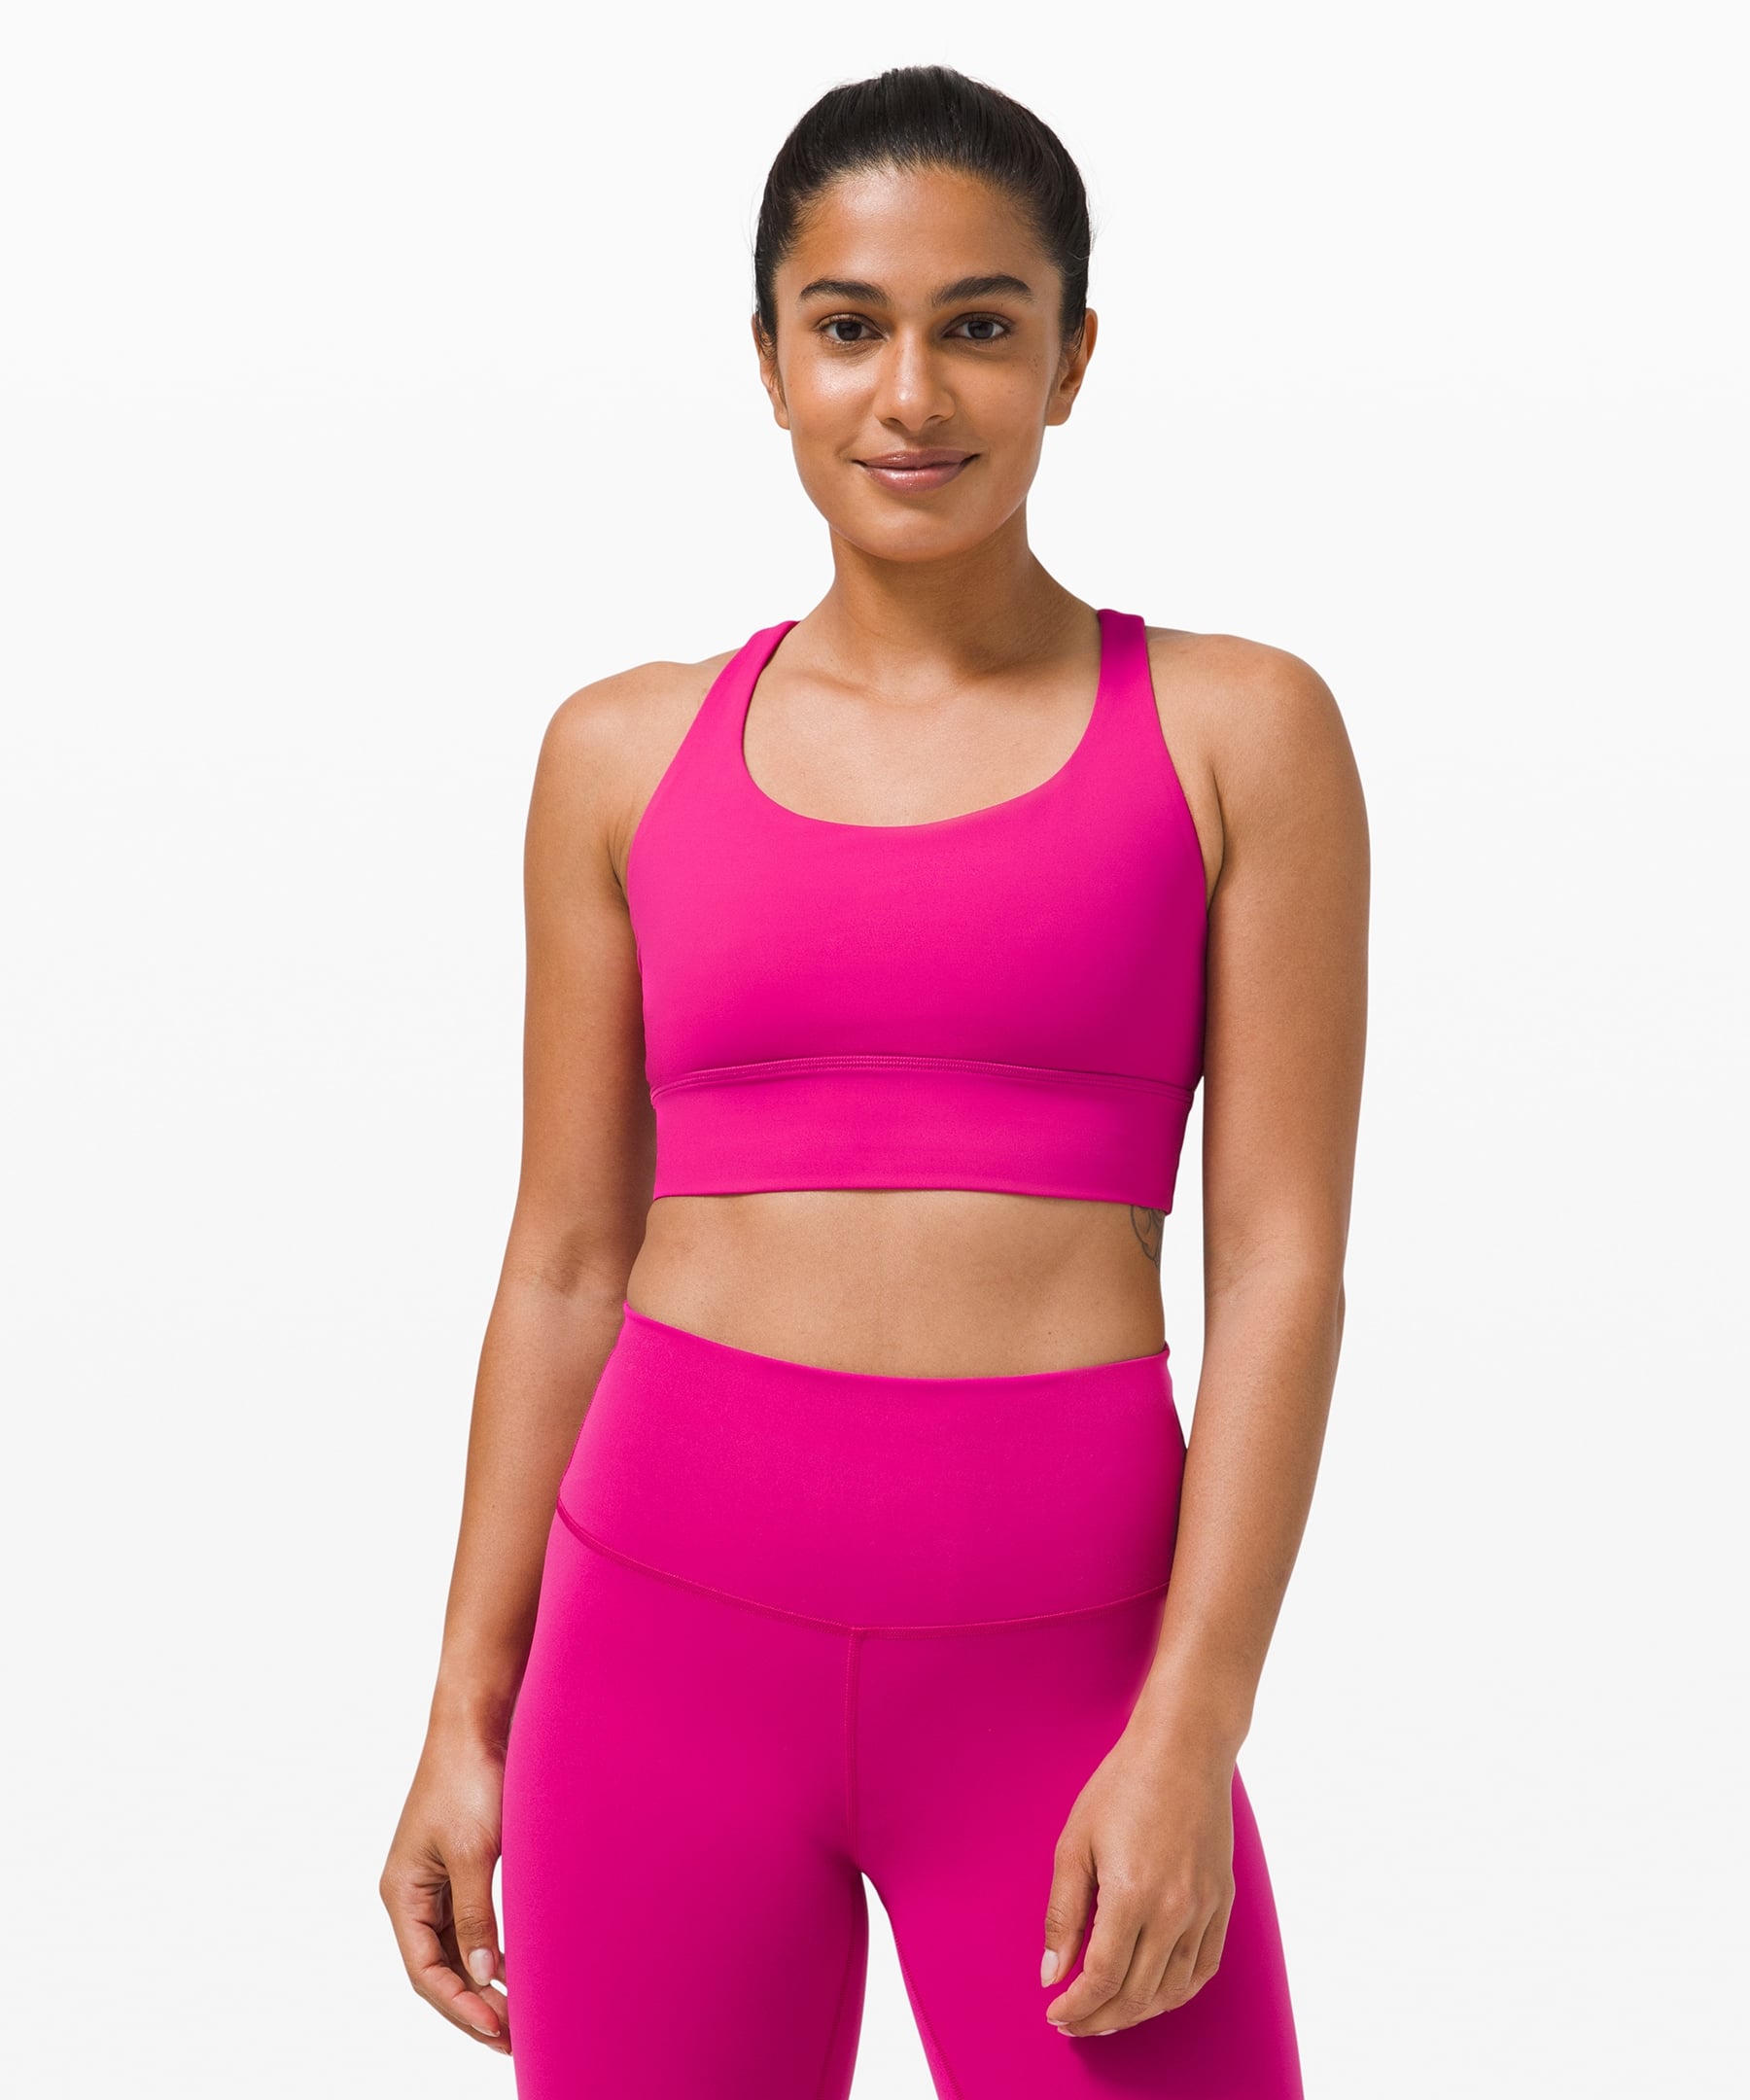 The Cutest Workout Set From Lululemon 🤍